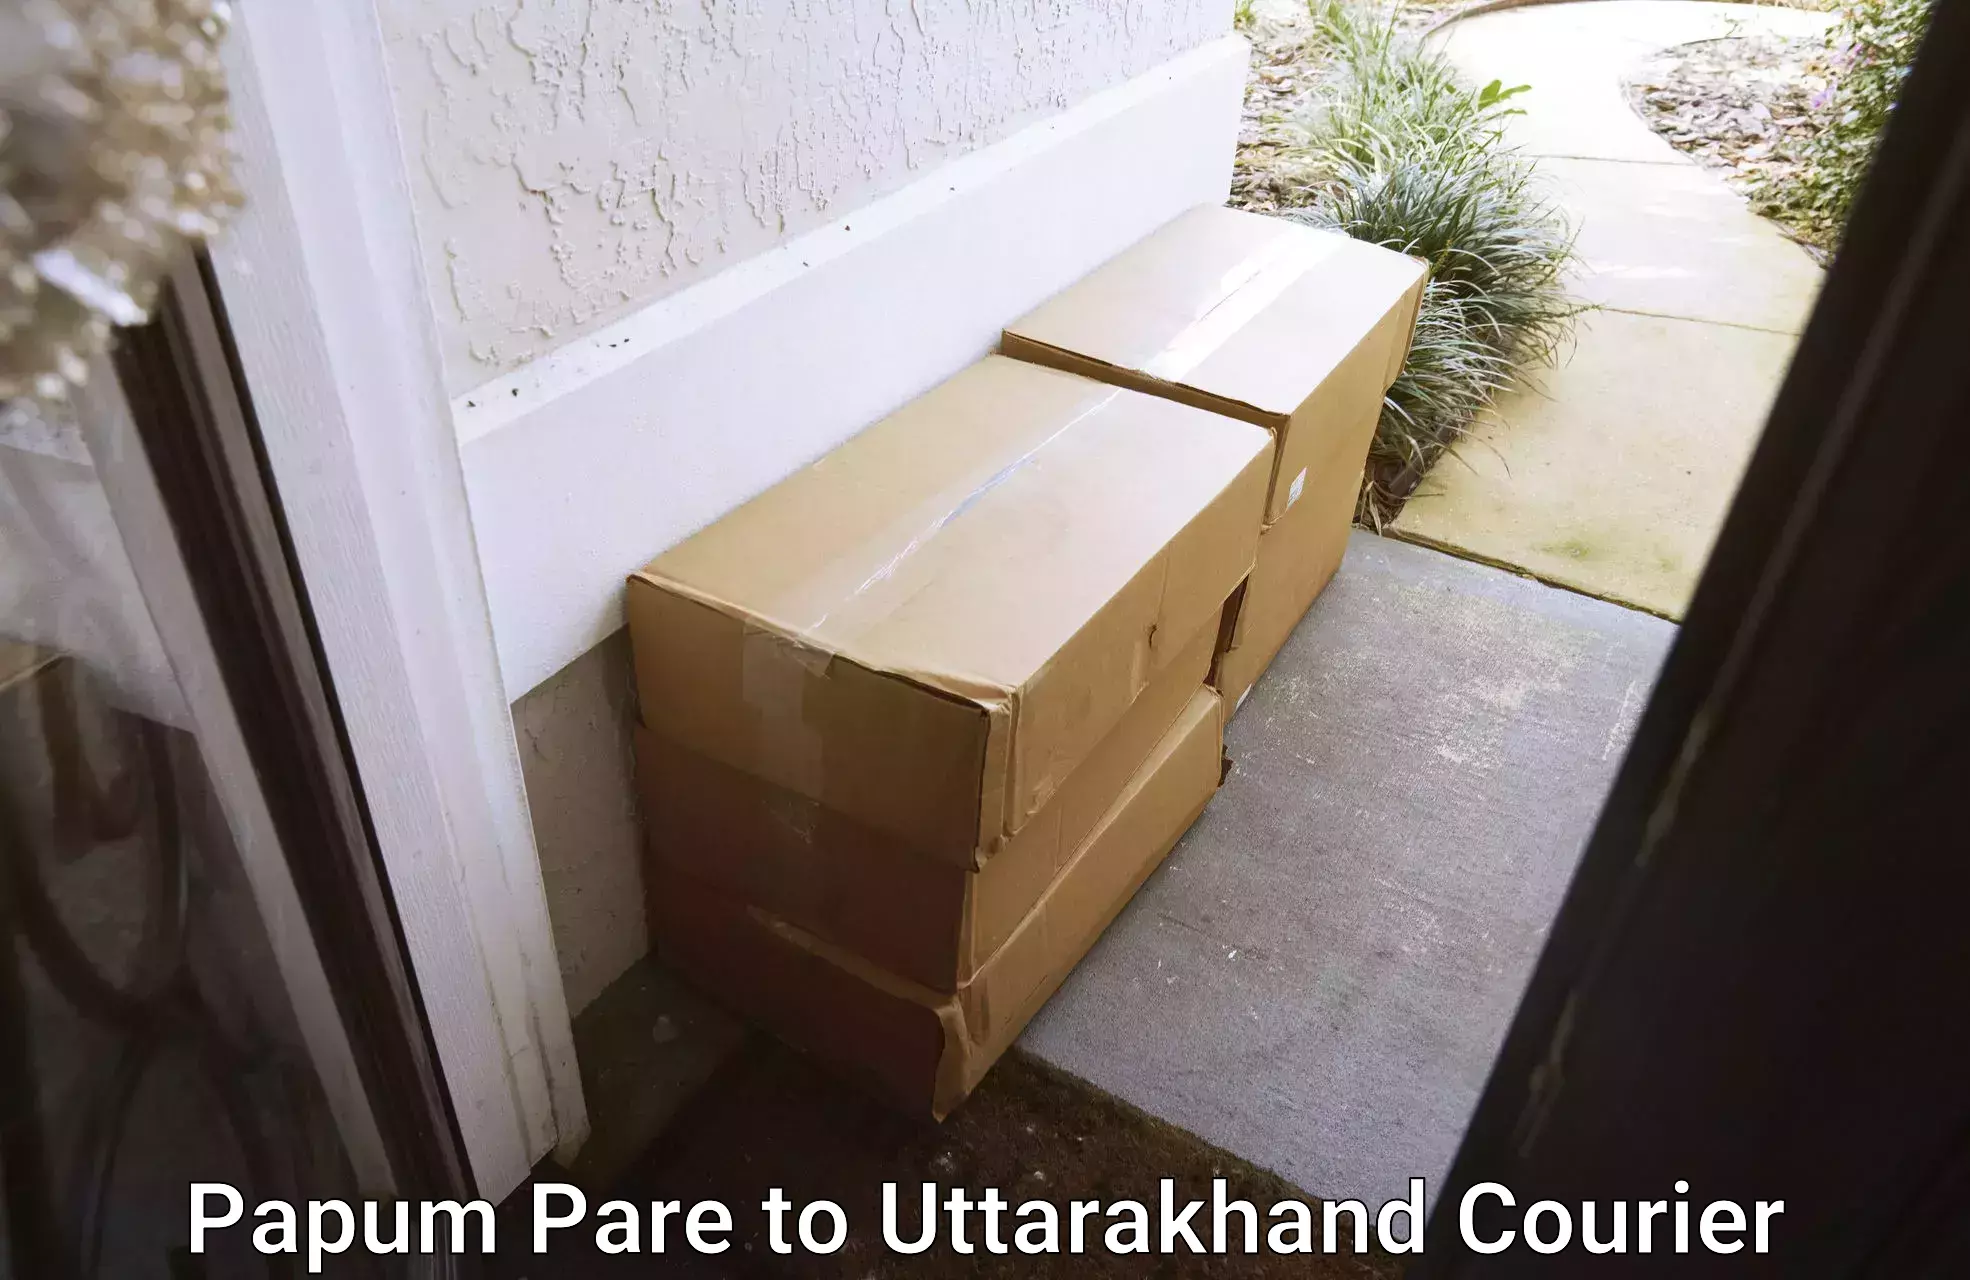 Courier service booking in Papum Pare to Lansdowne